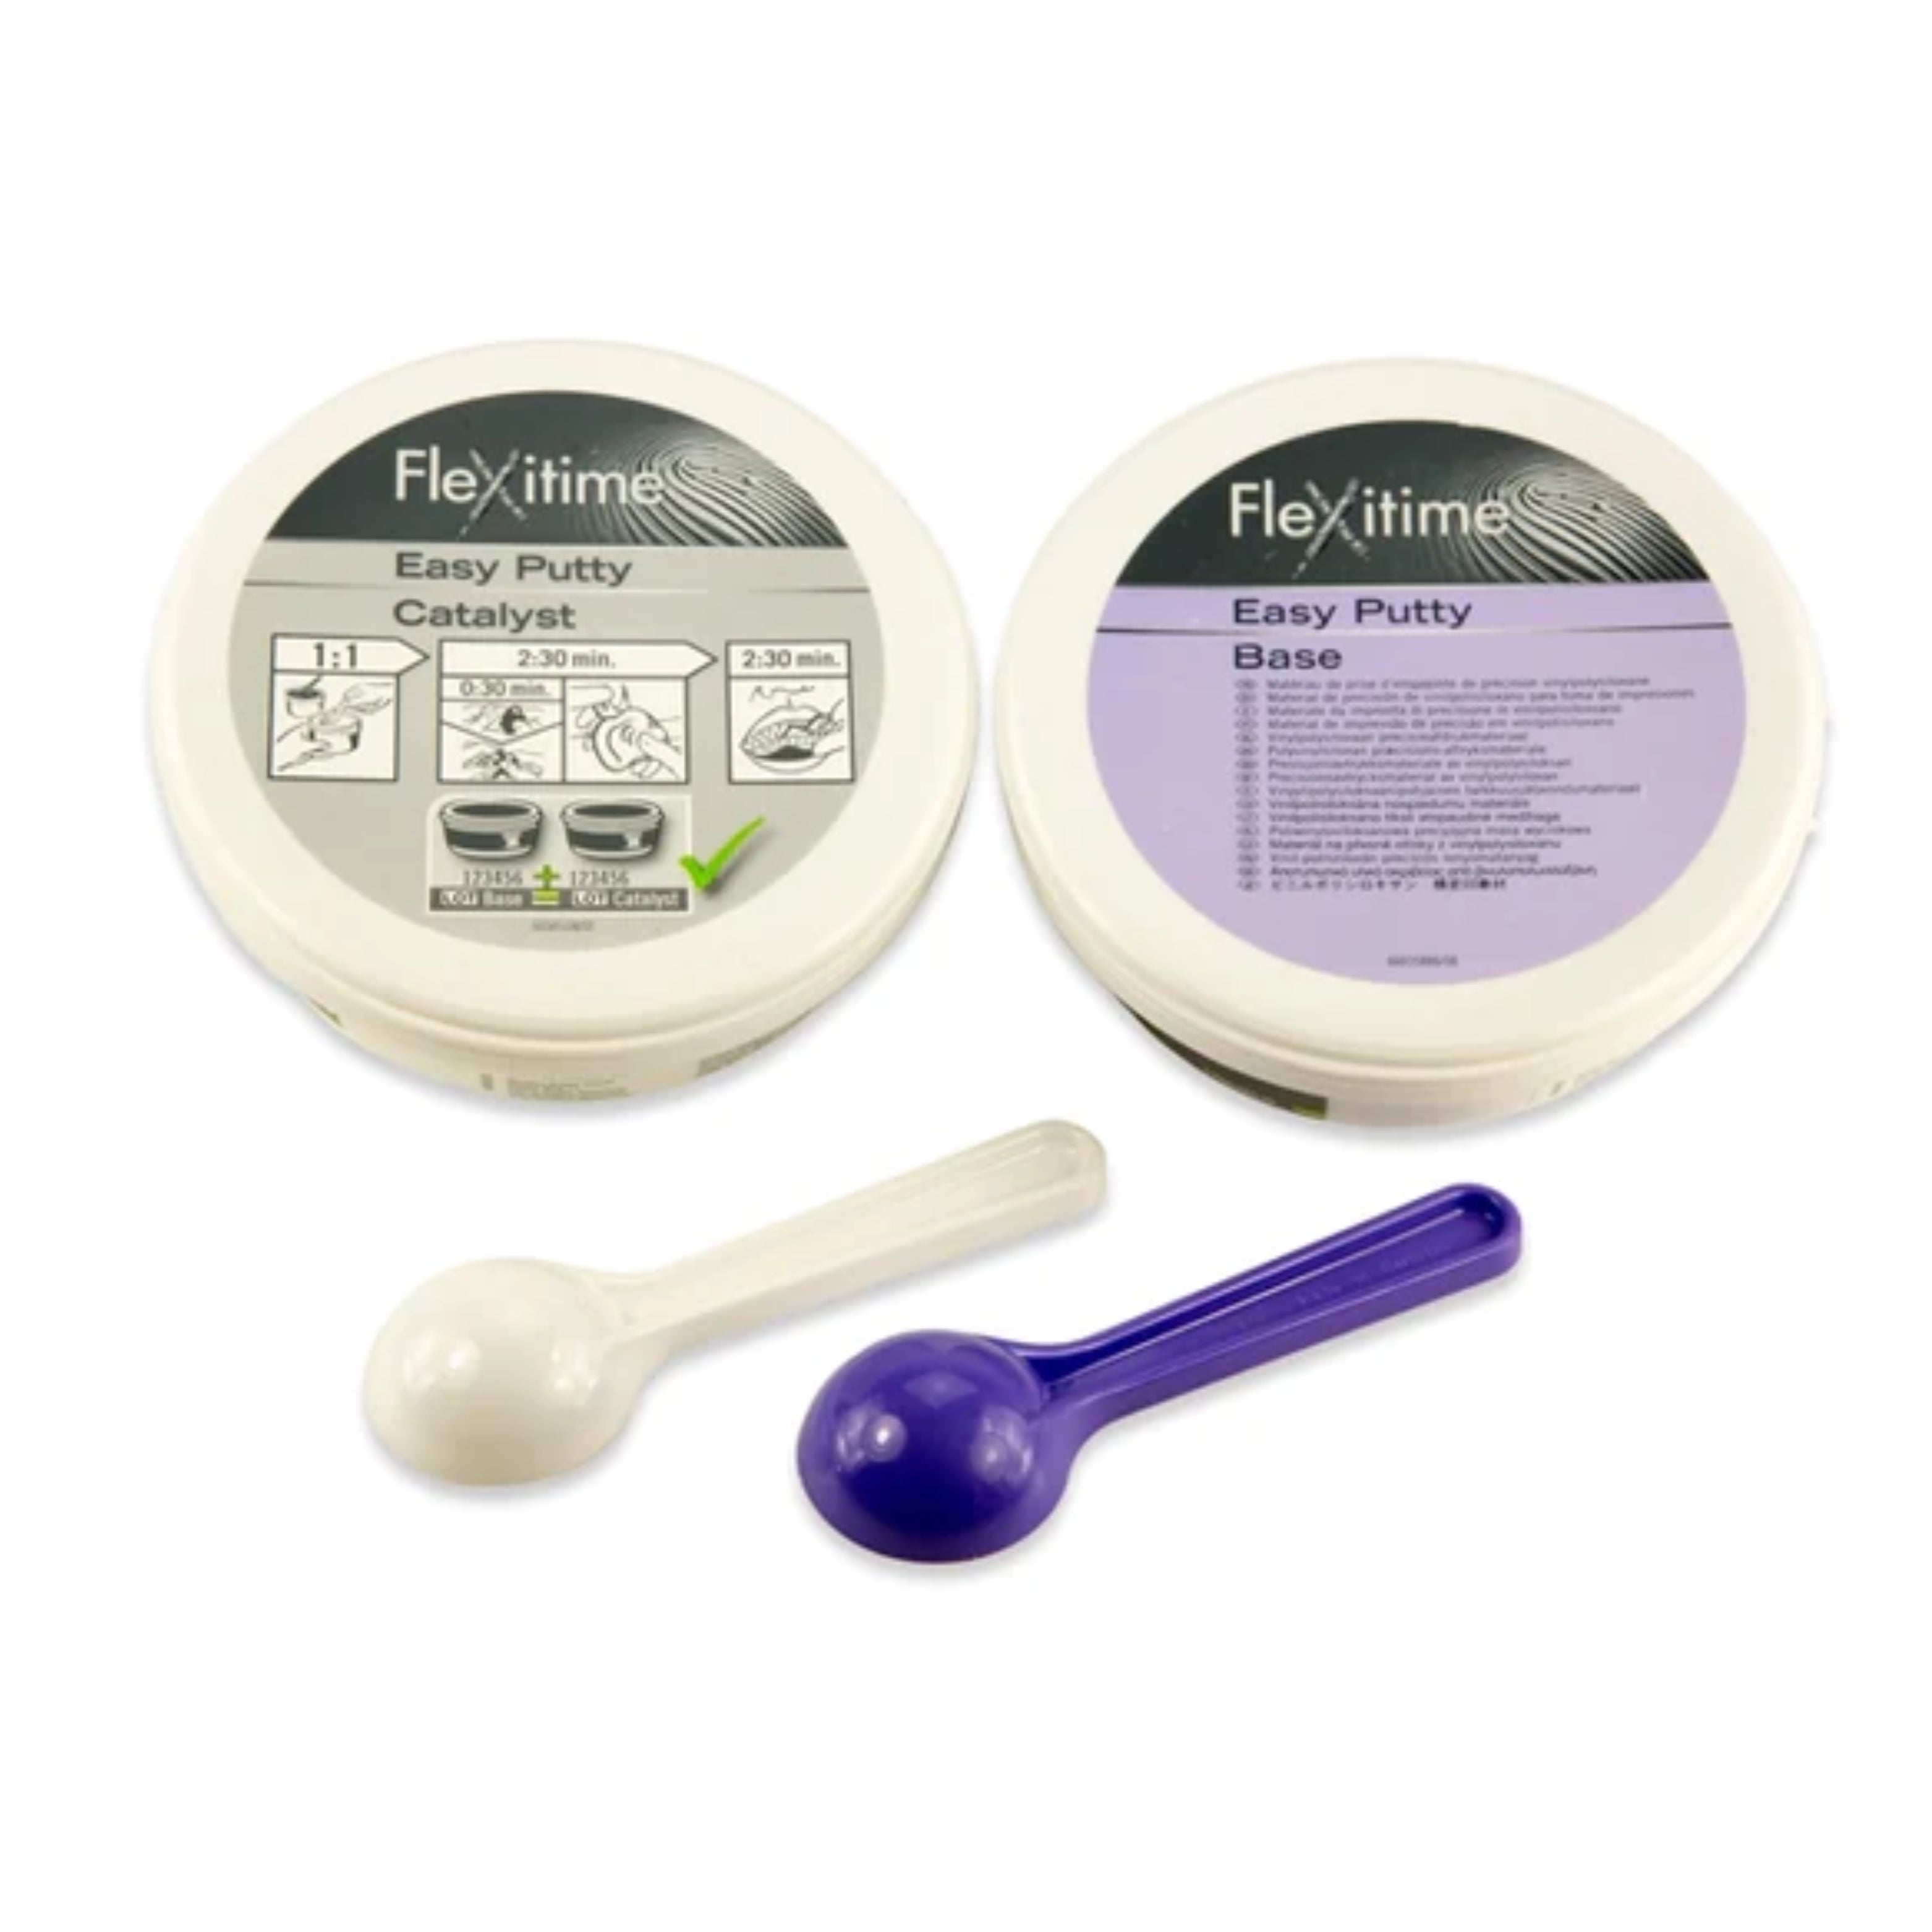 kulzer-flexitime-easy-putty-dental-impression-material-refill